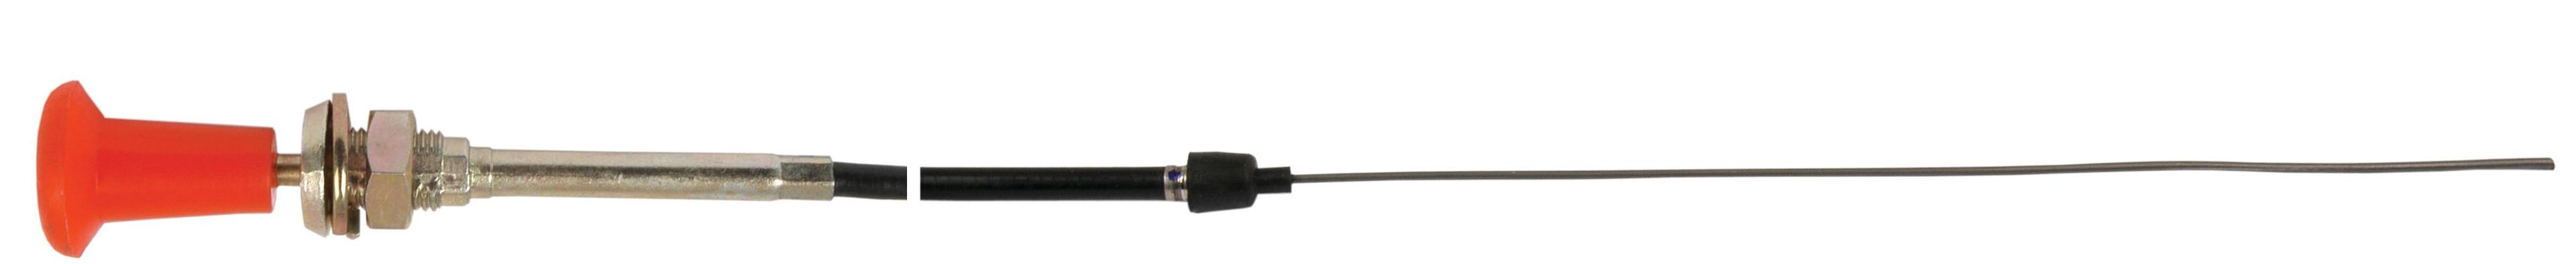 PERKINS CABLE-STOP (1545MM) 41840